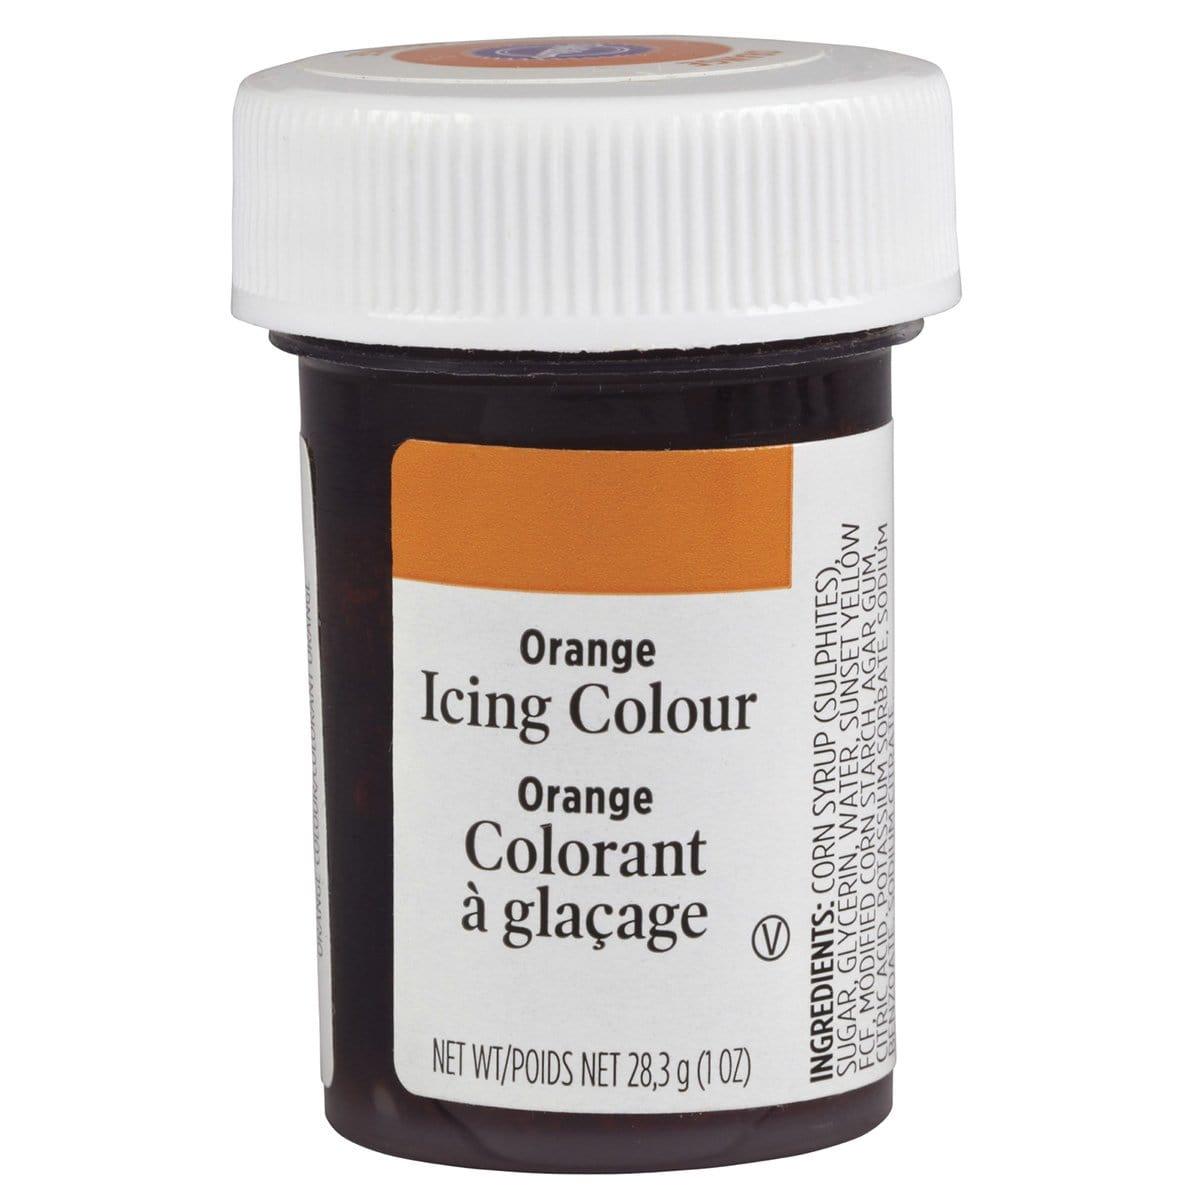 Buy Cake Supplies Icing Color - Orange 1 oz sold at Party Expert